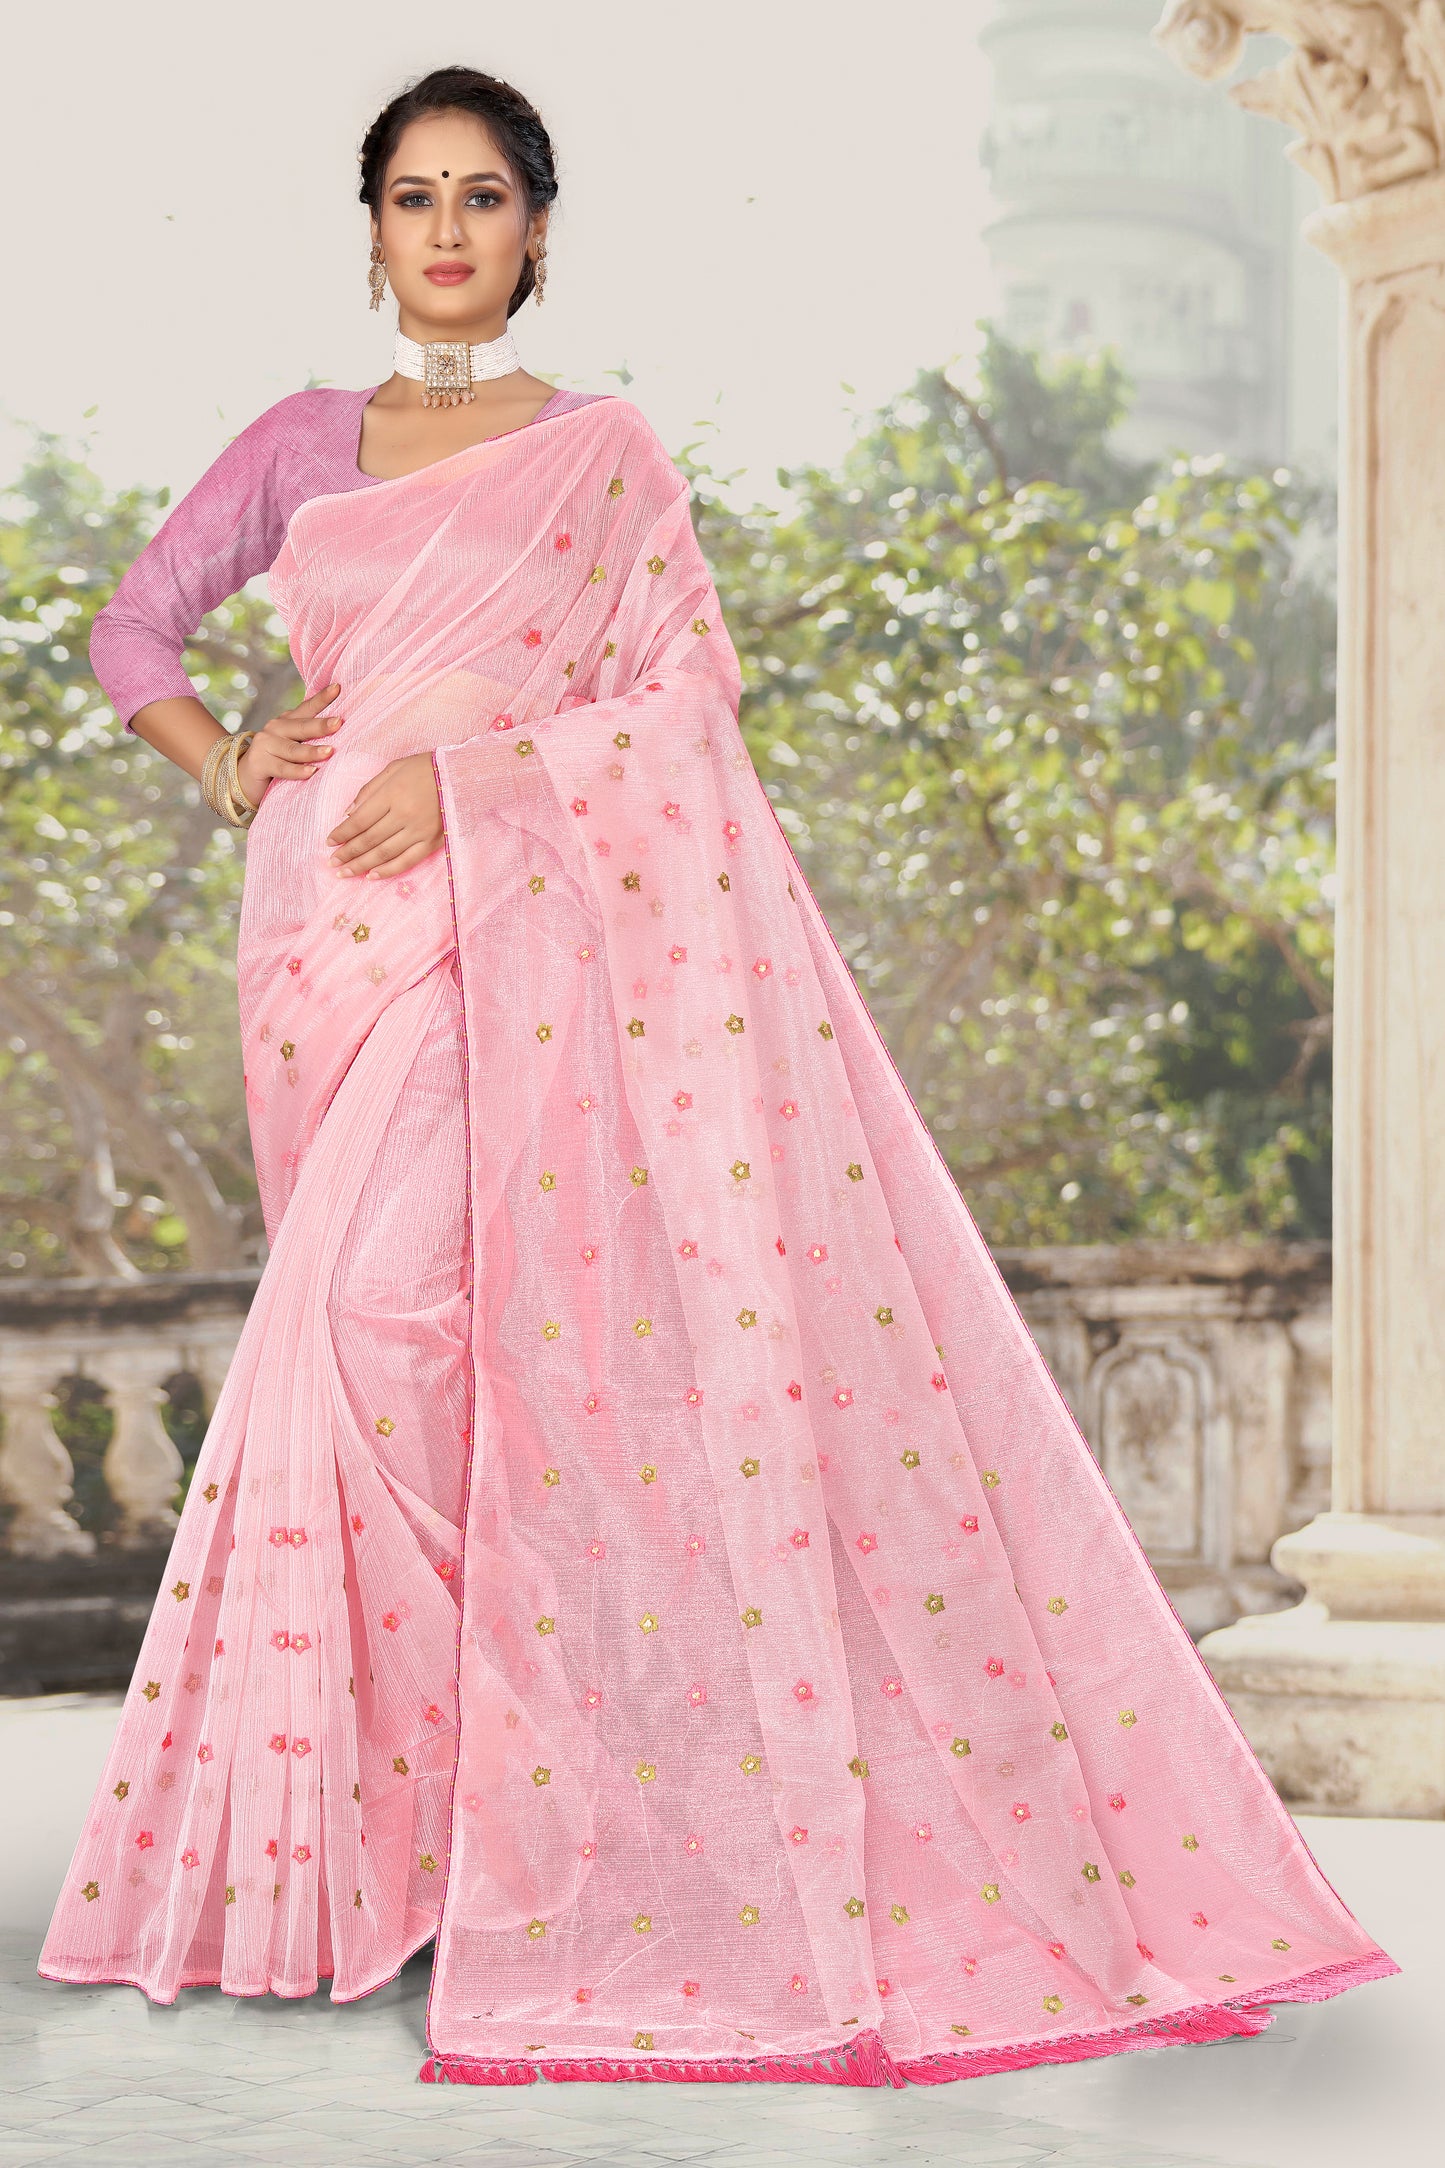 OFFICIAL ORGANZA COTTON WITH WORK IN WHOLE SAREE FOR ALL FORMAL OCCASIONS IN PINK BEAUTY